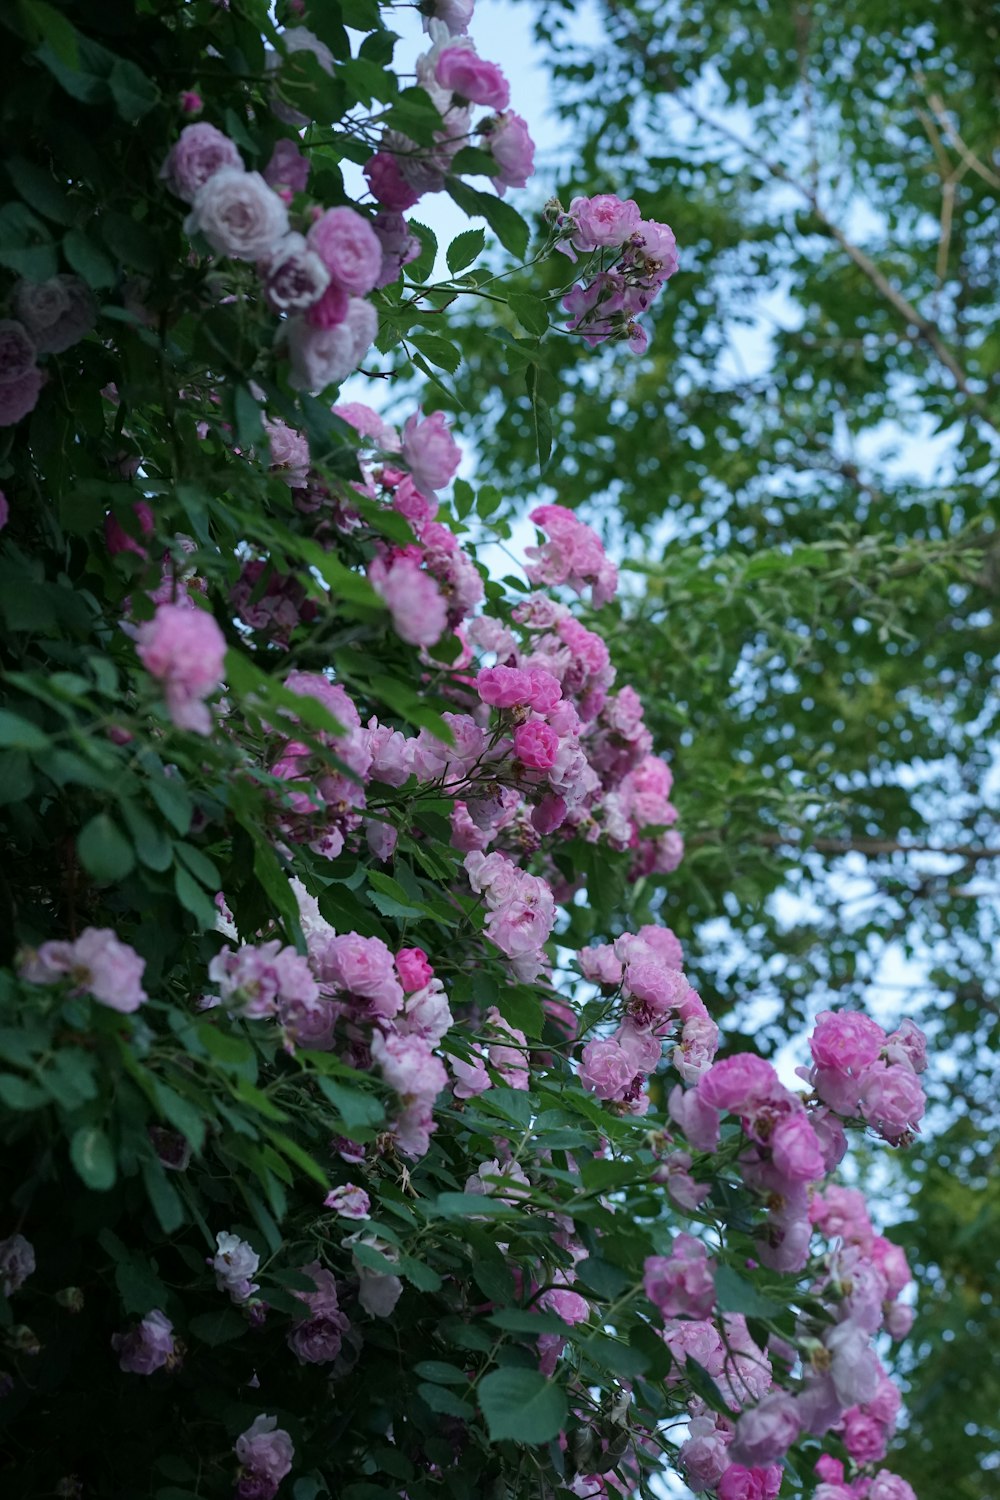 pink flowers are growing on the branches of a tree